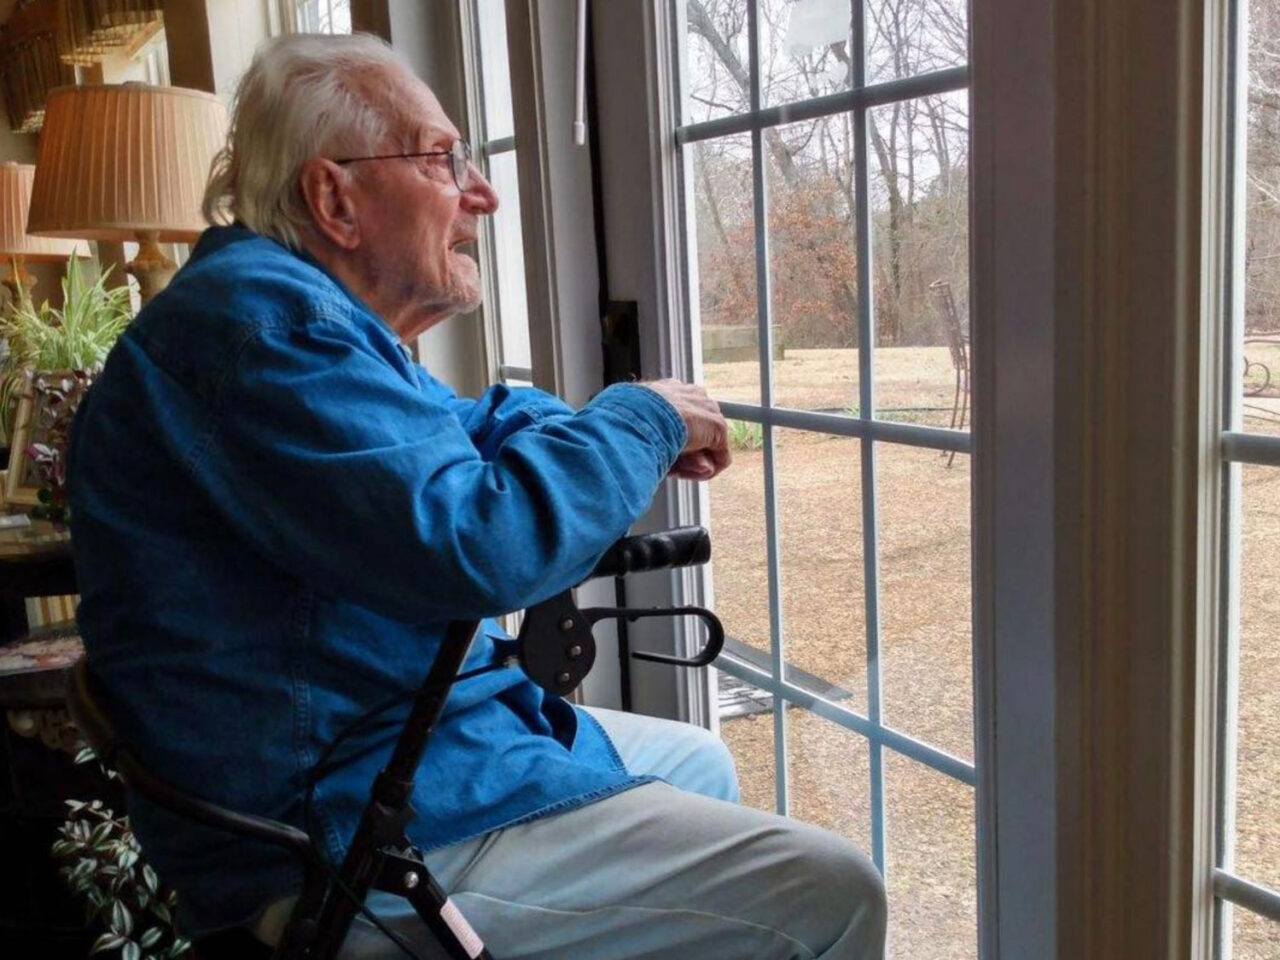 An elderly person rests on a walker and looks outside through windows.